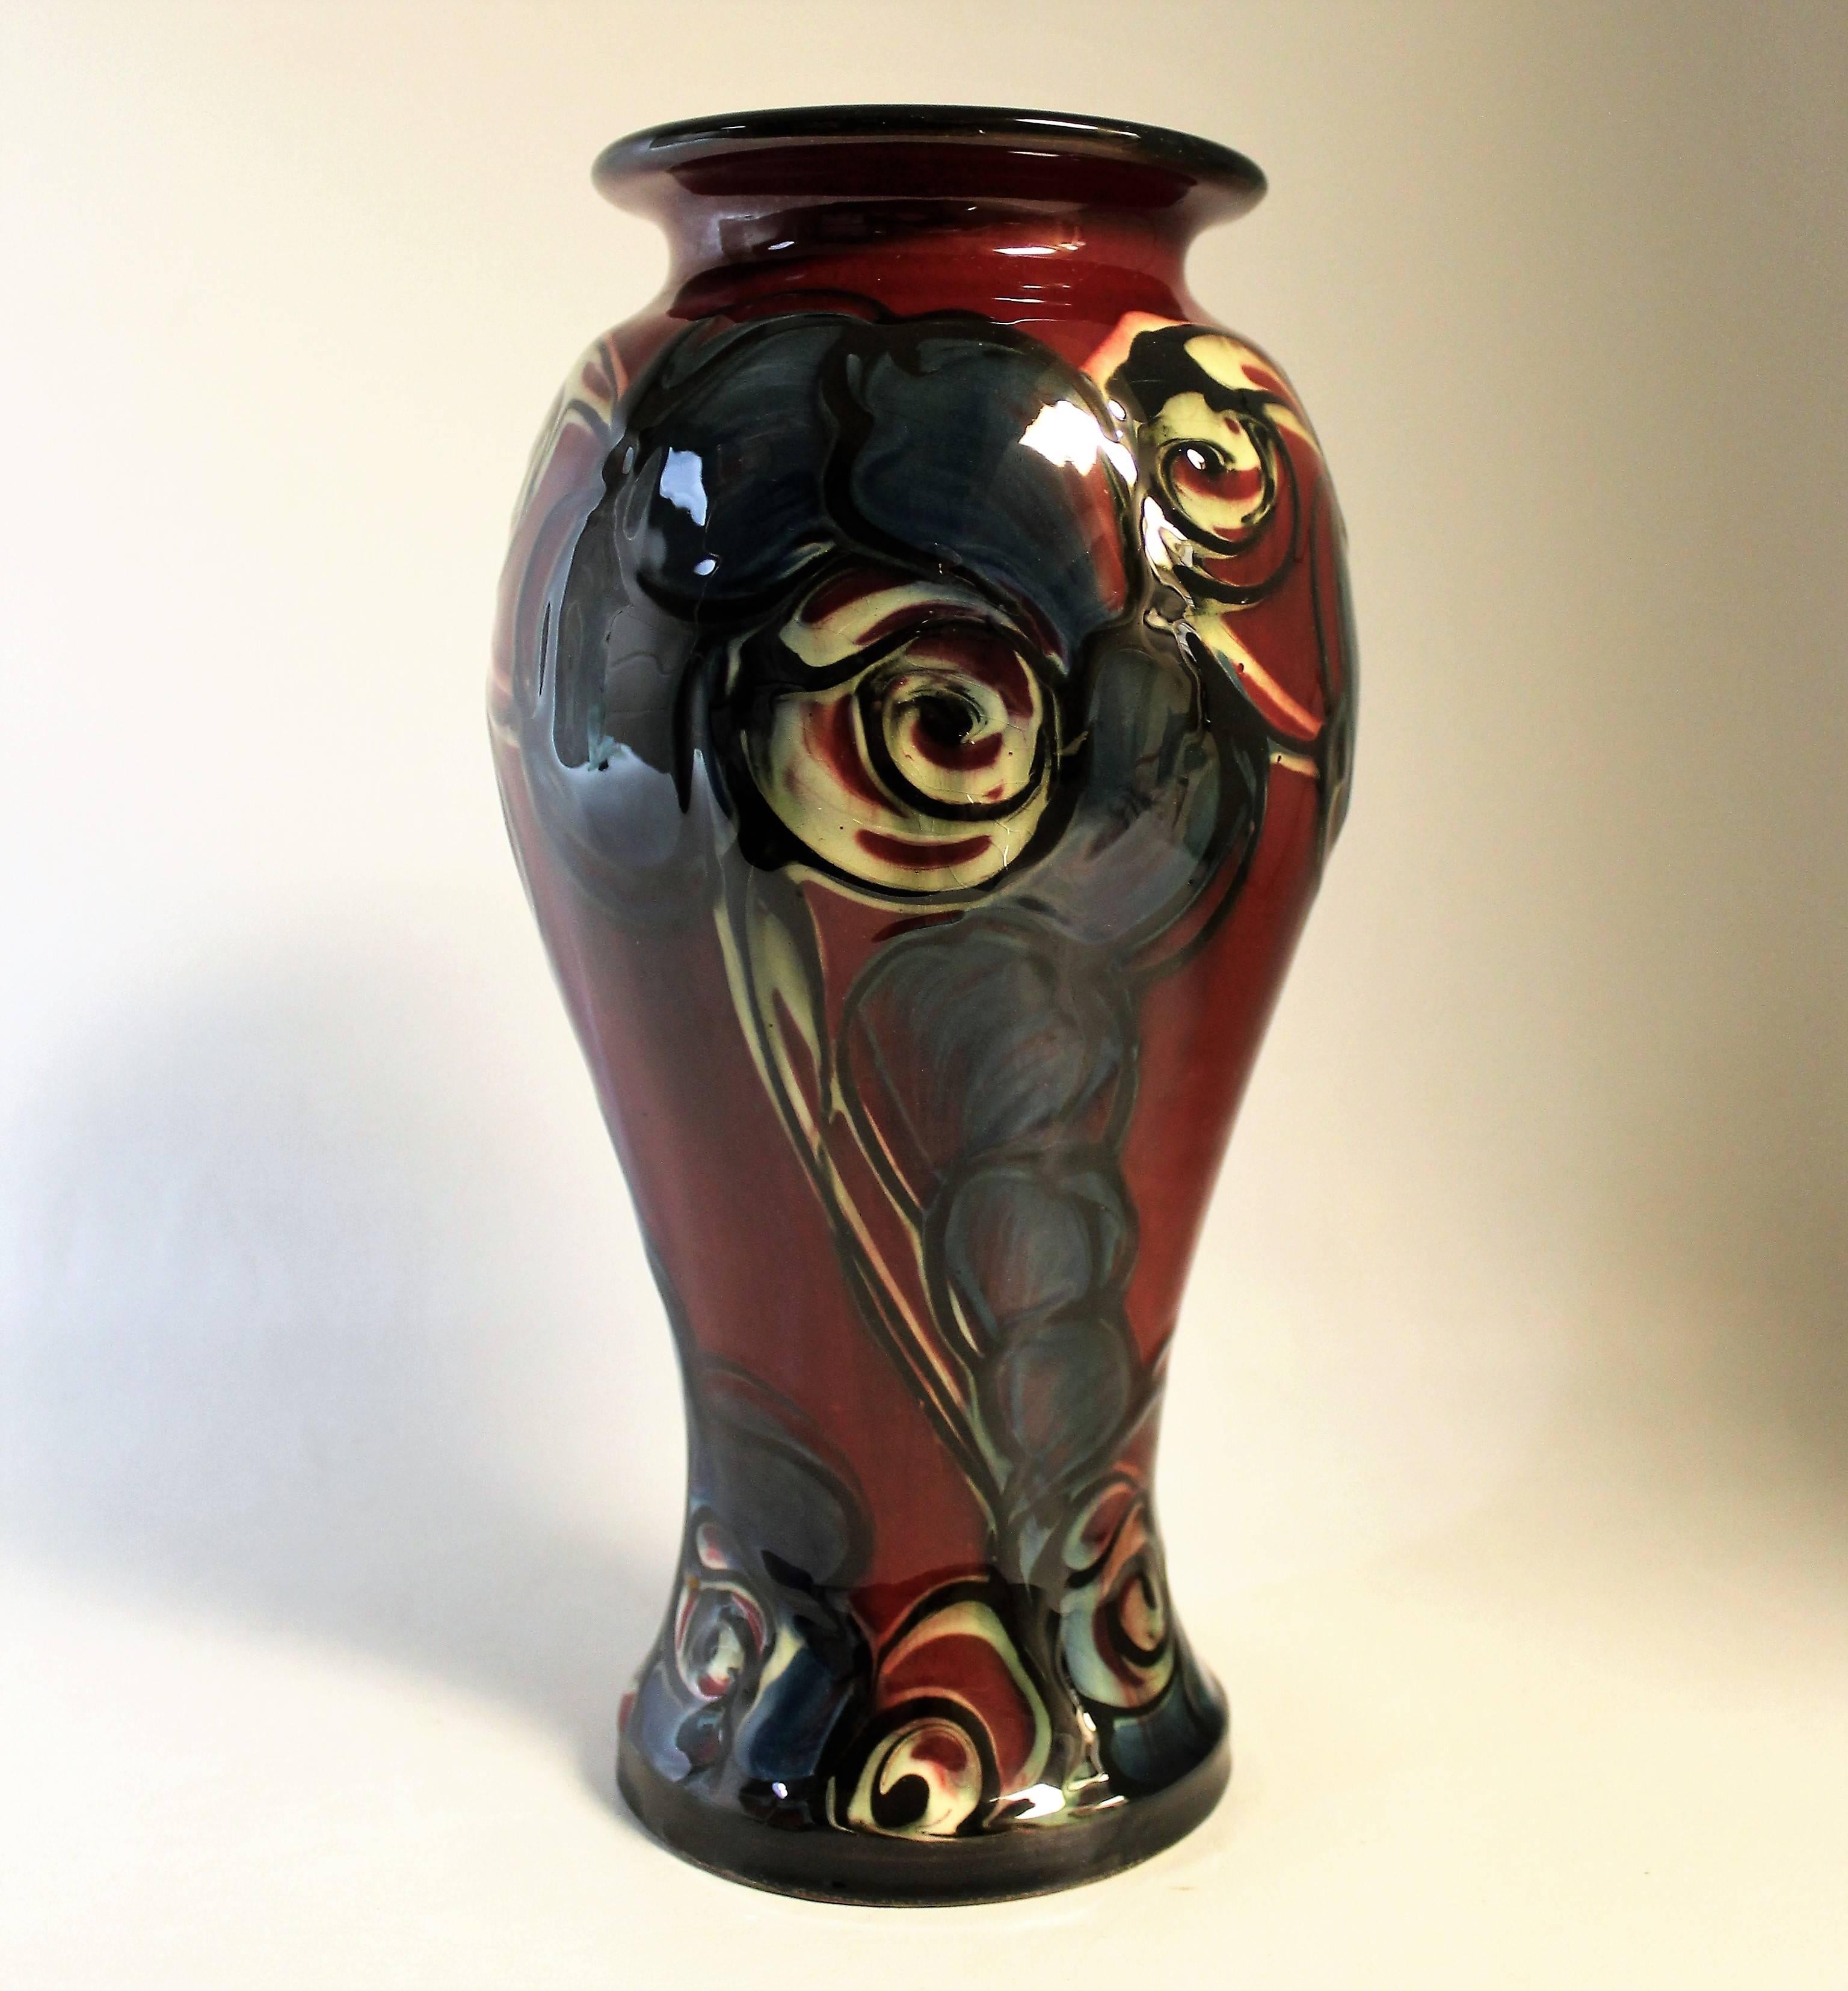 Horstens Danico Danish vase. Done in the Skonvirke which is the Danish version of Art Nouveau and came to Denmark a bit later.